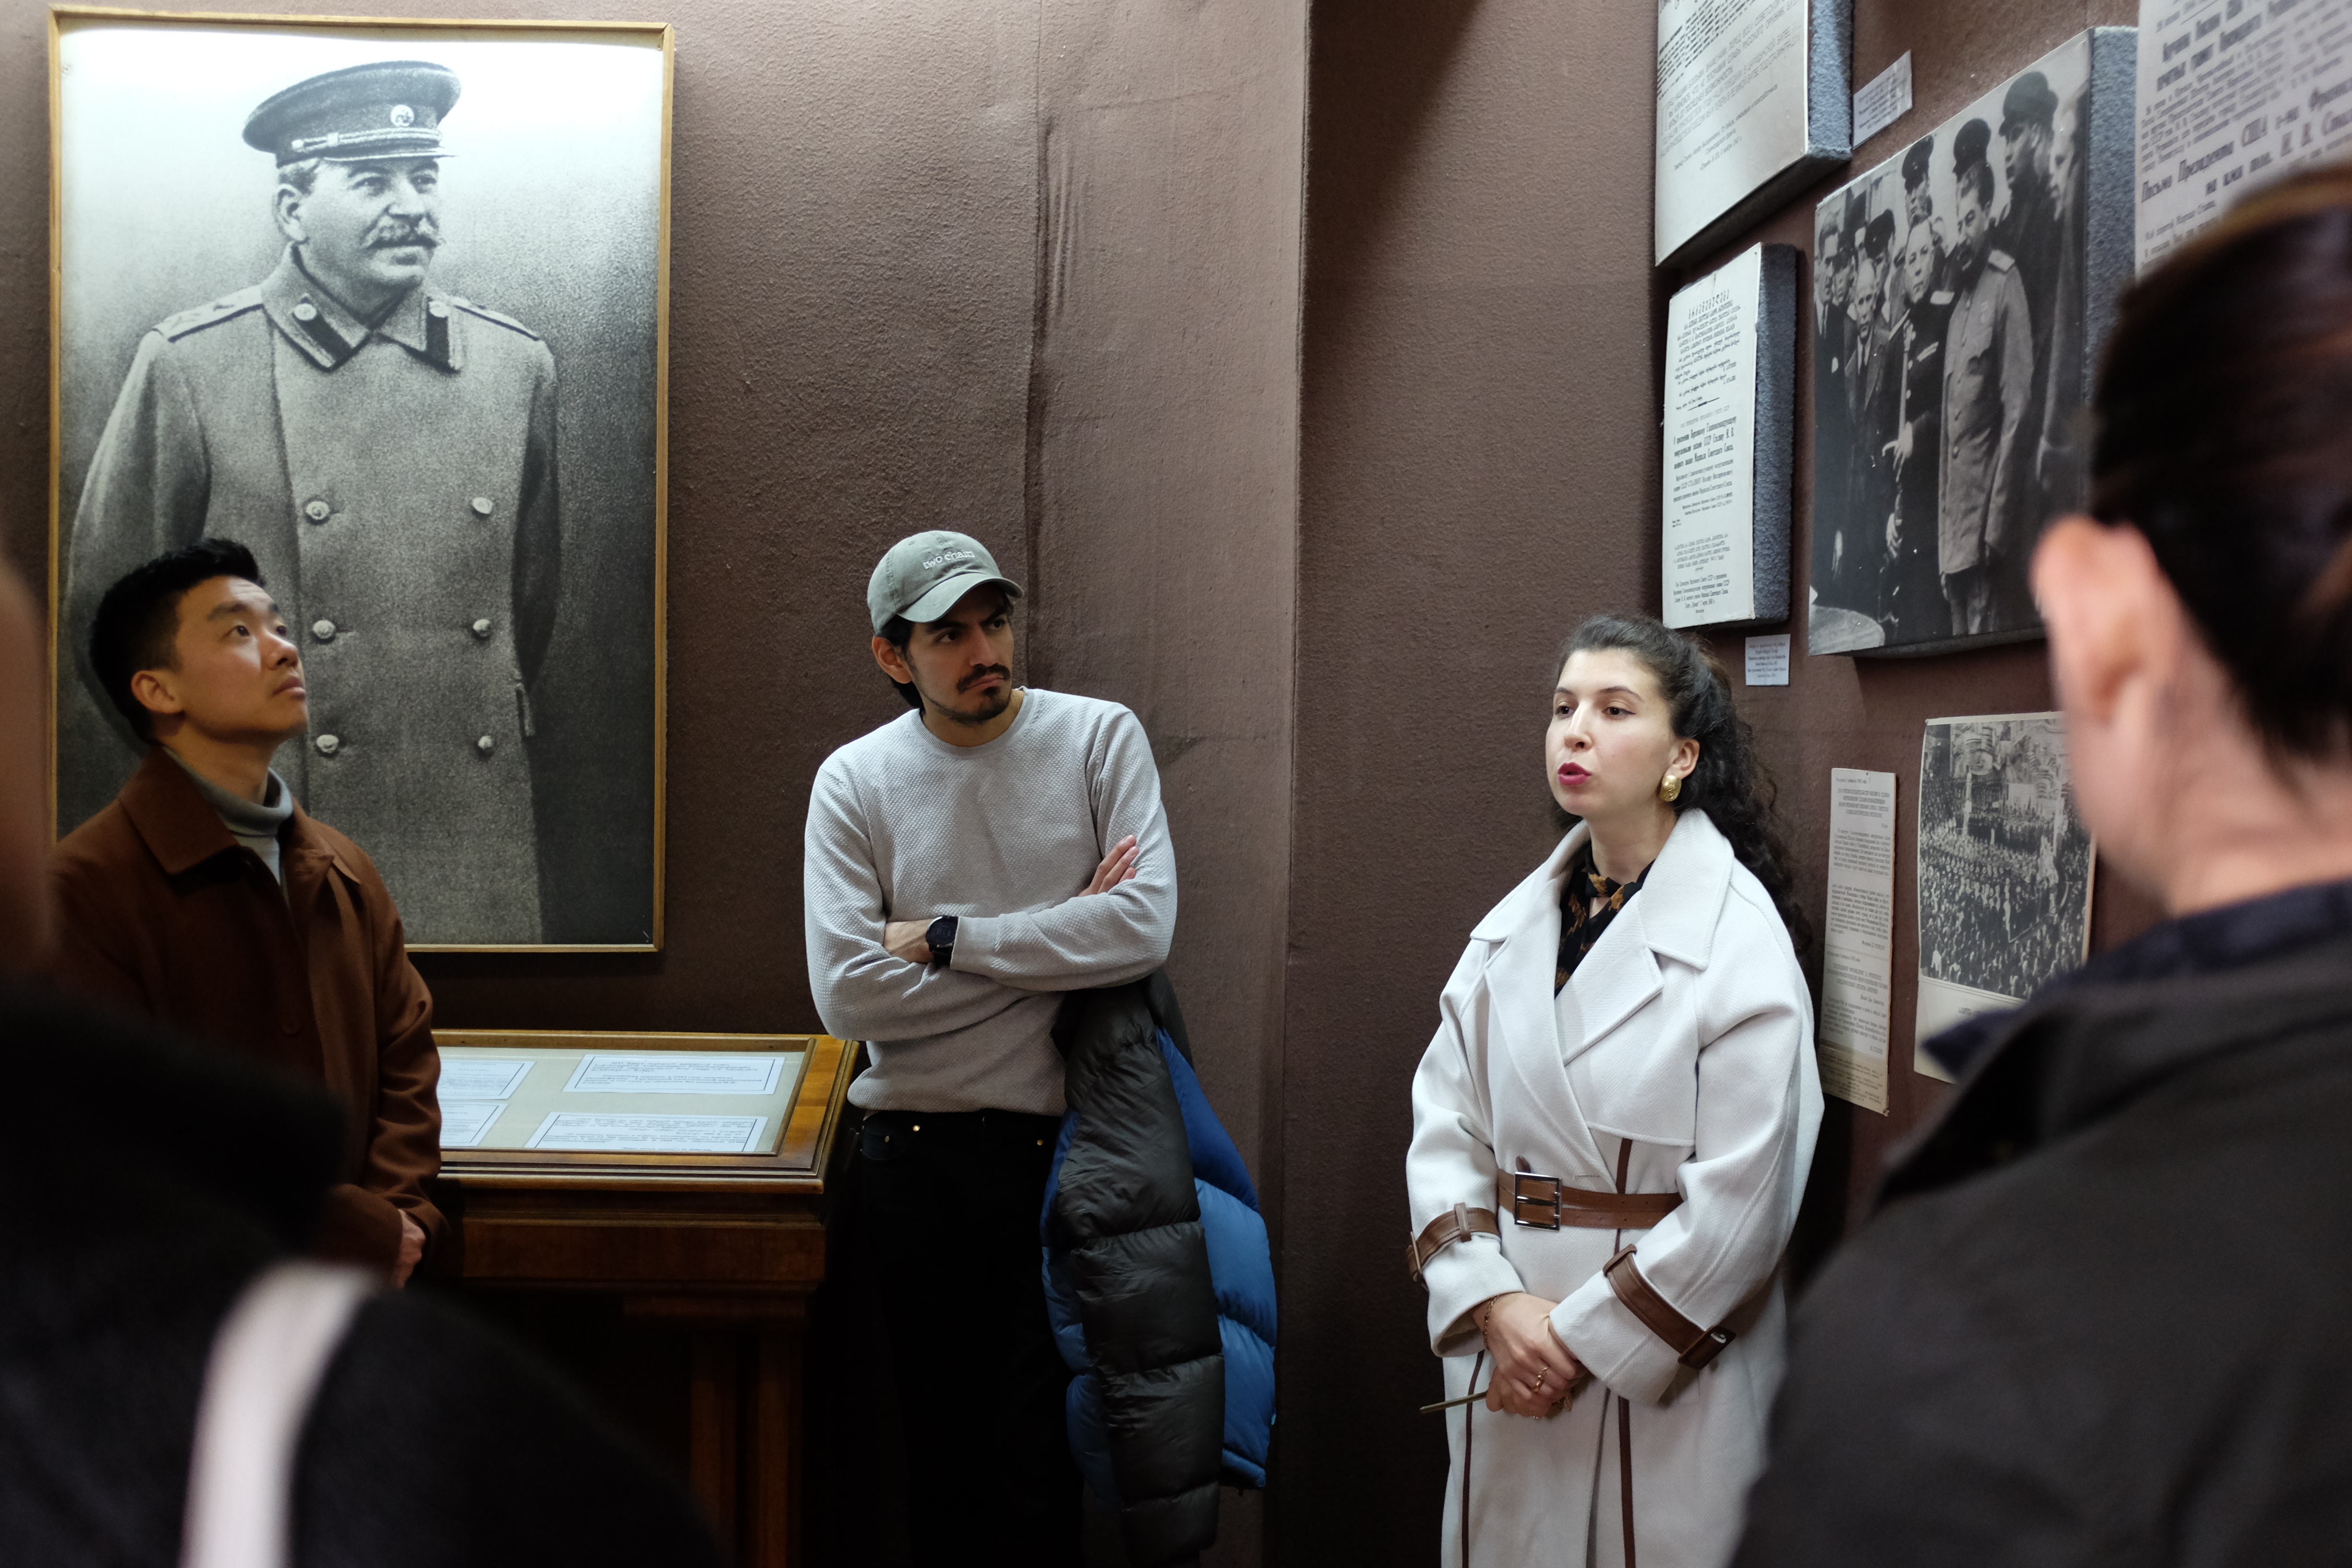 People gathered in a museum with a portrait of Joseph Stalin in the background.